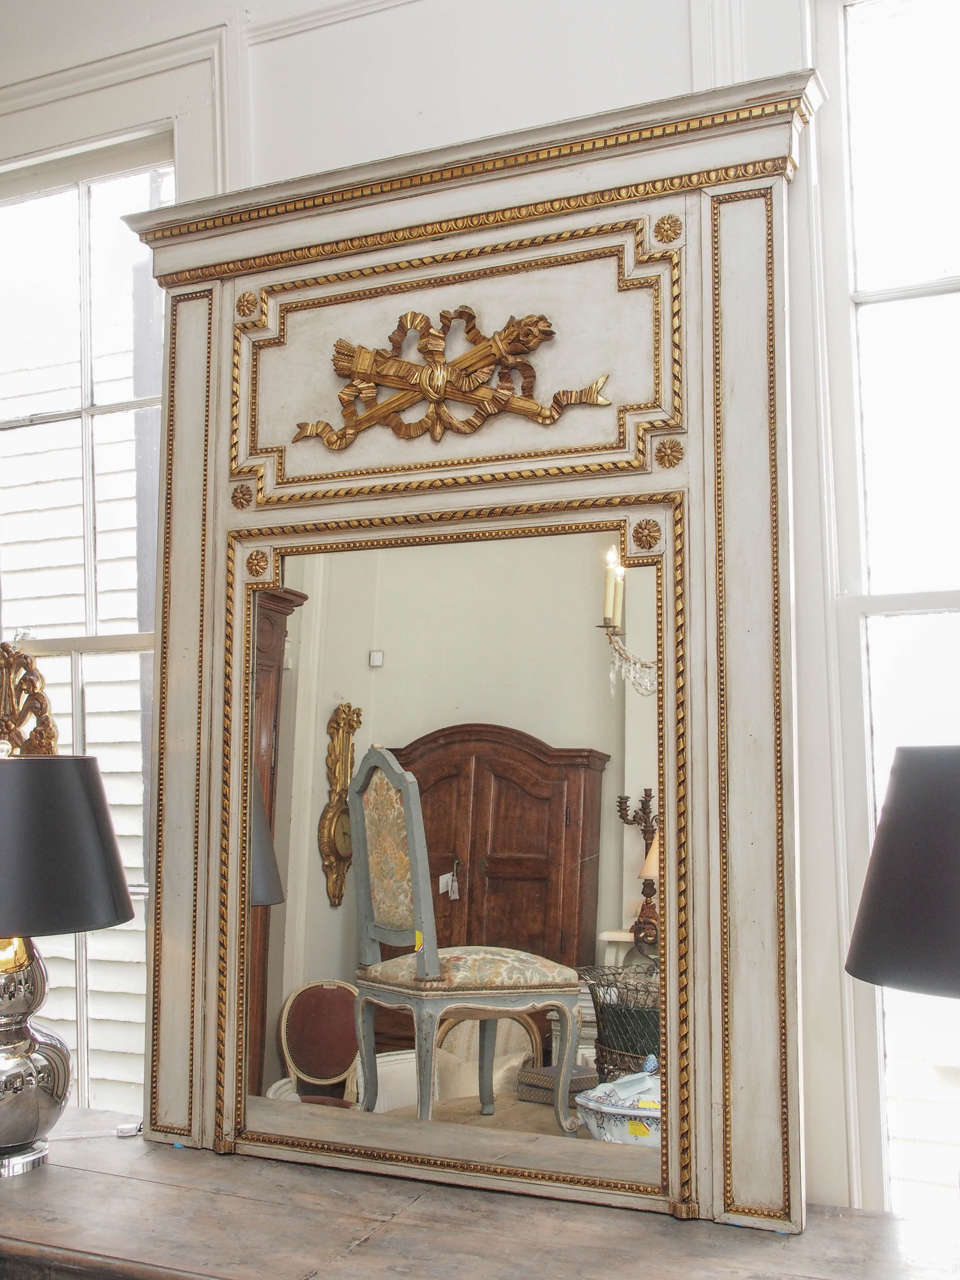 19th century French giltwood trumeau mirror Louis XVI style with classical bow and arrow cartouche. Refreshed paint.